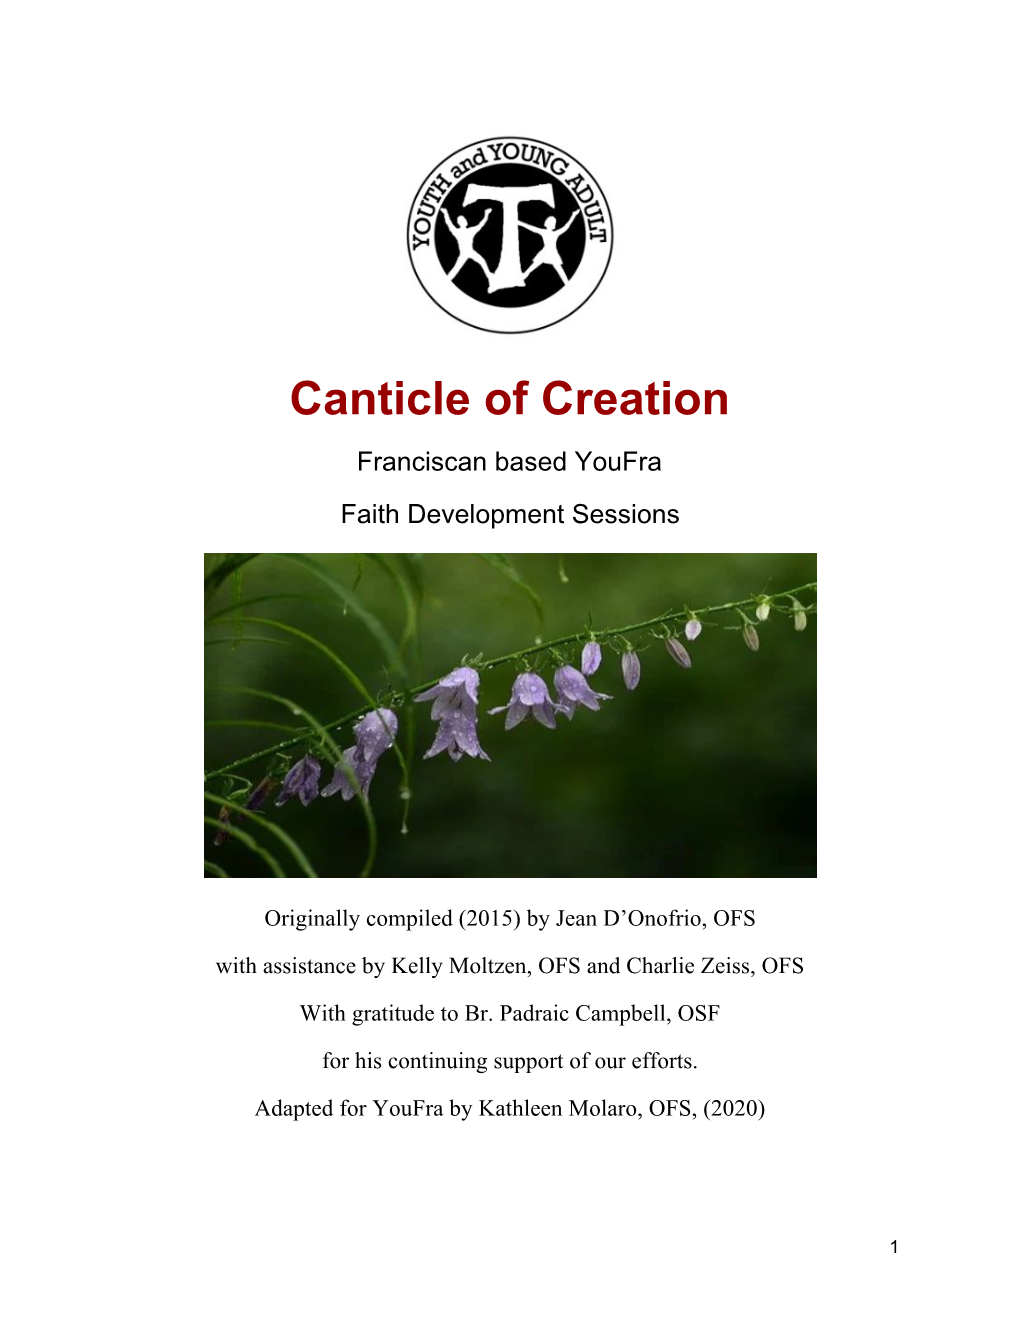 Canticle of Creation Franciscan Based Youfra Faith Development Sessions